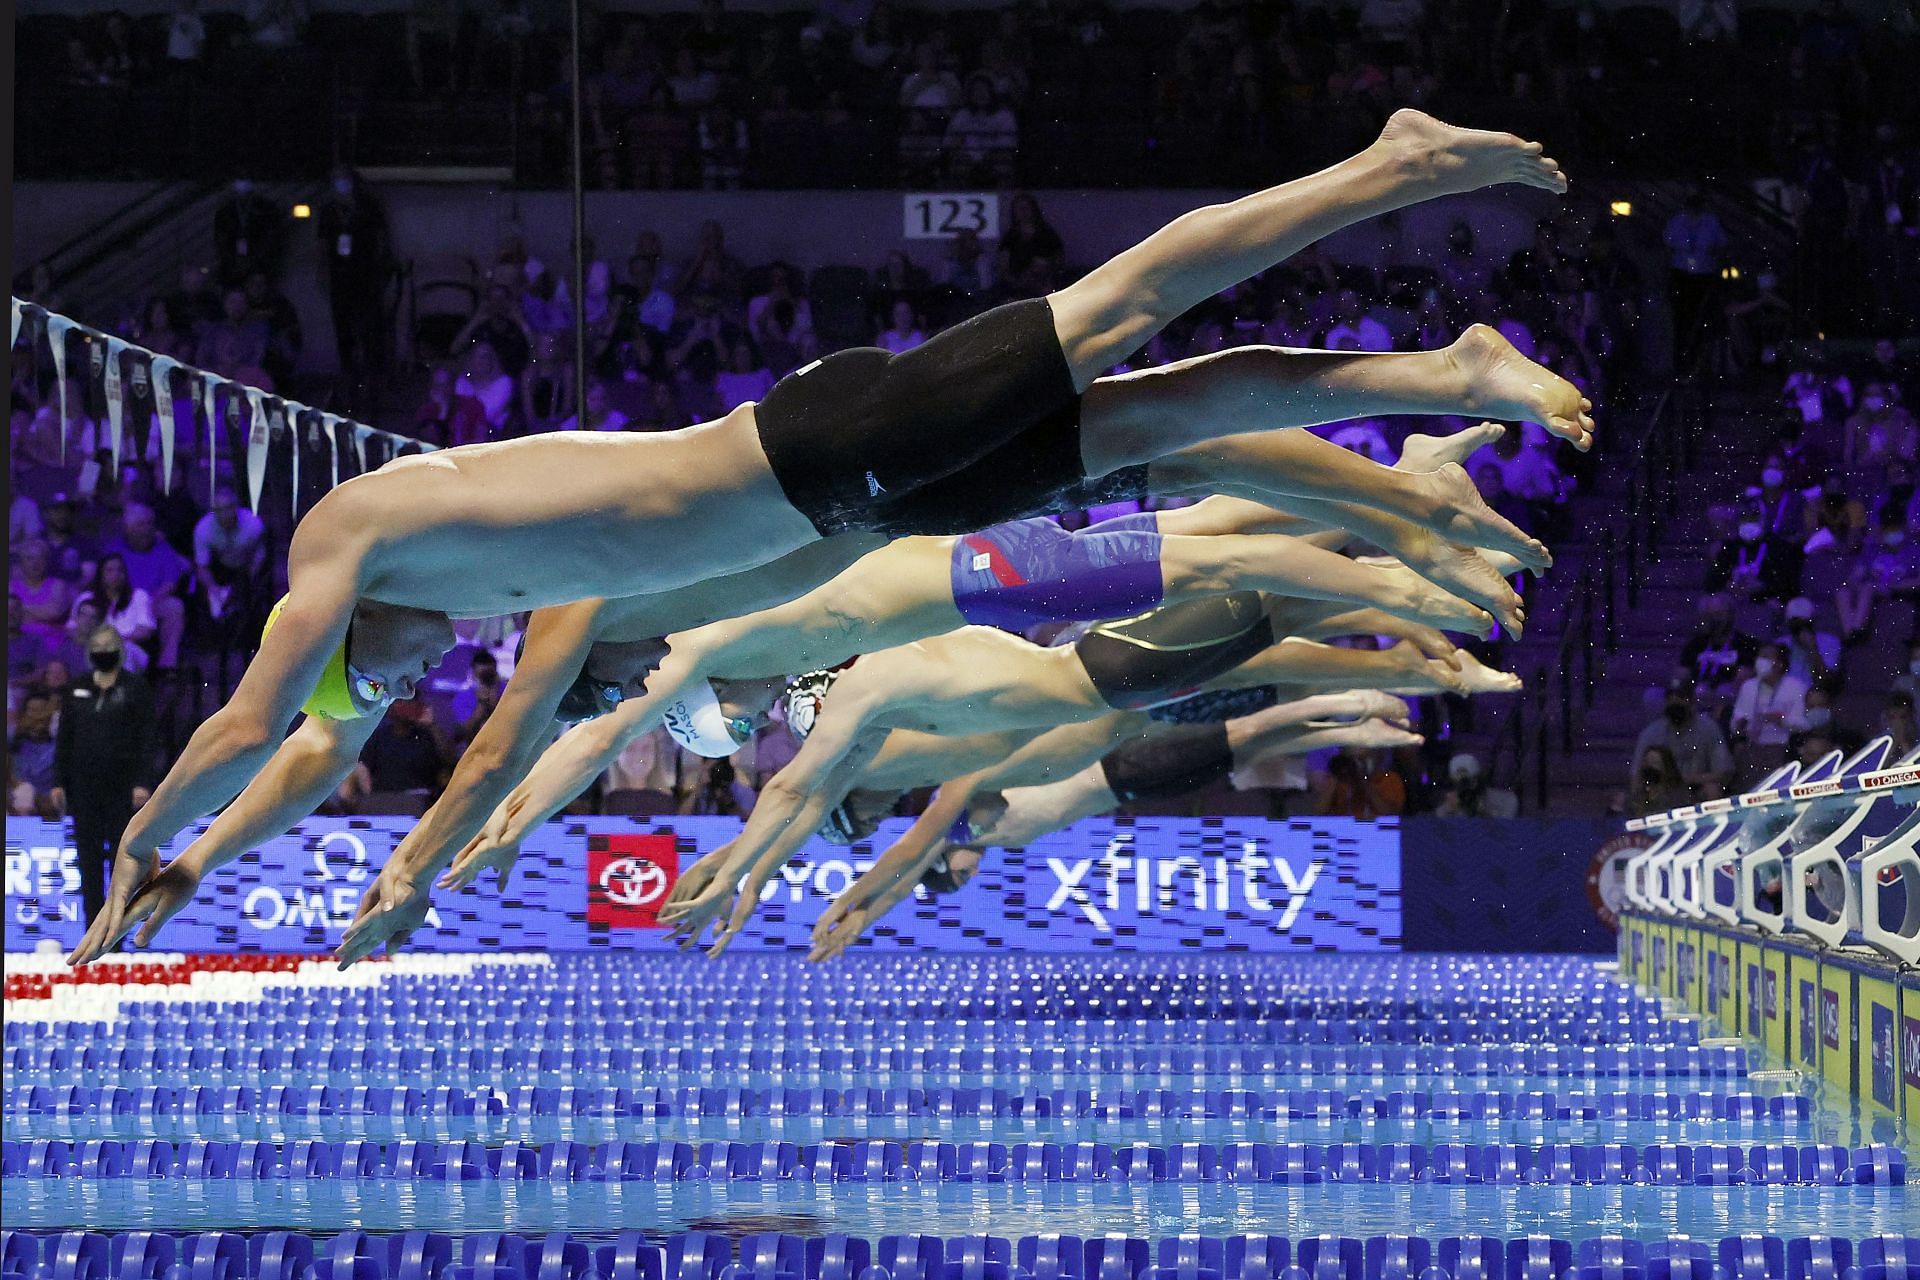 Lochte at the finals of the 2021 U.S. Olympic Trials - Swimming - Day 6 (Image via Getty)